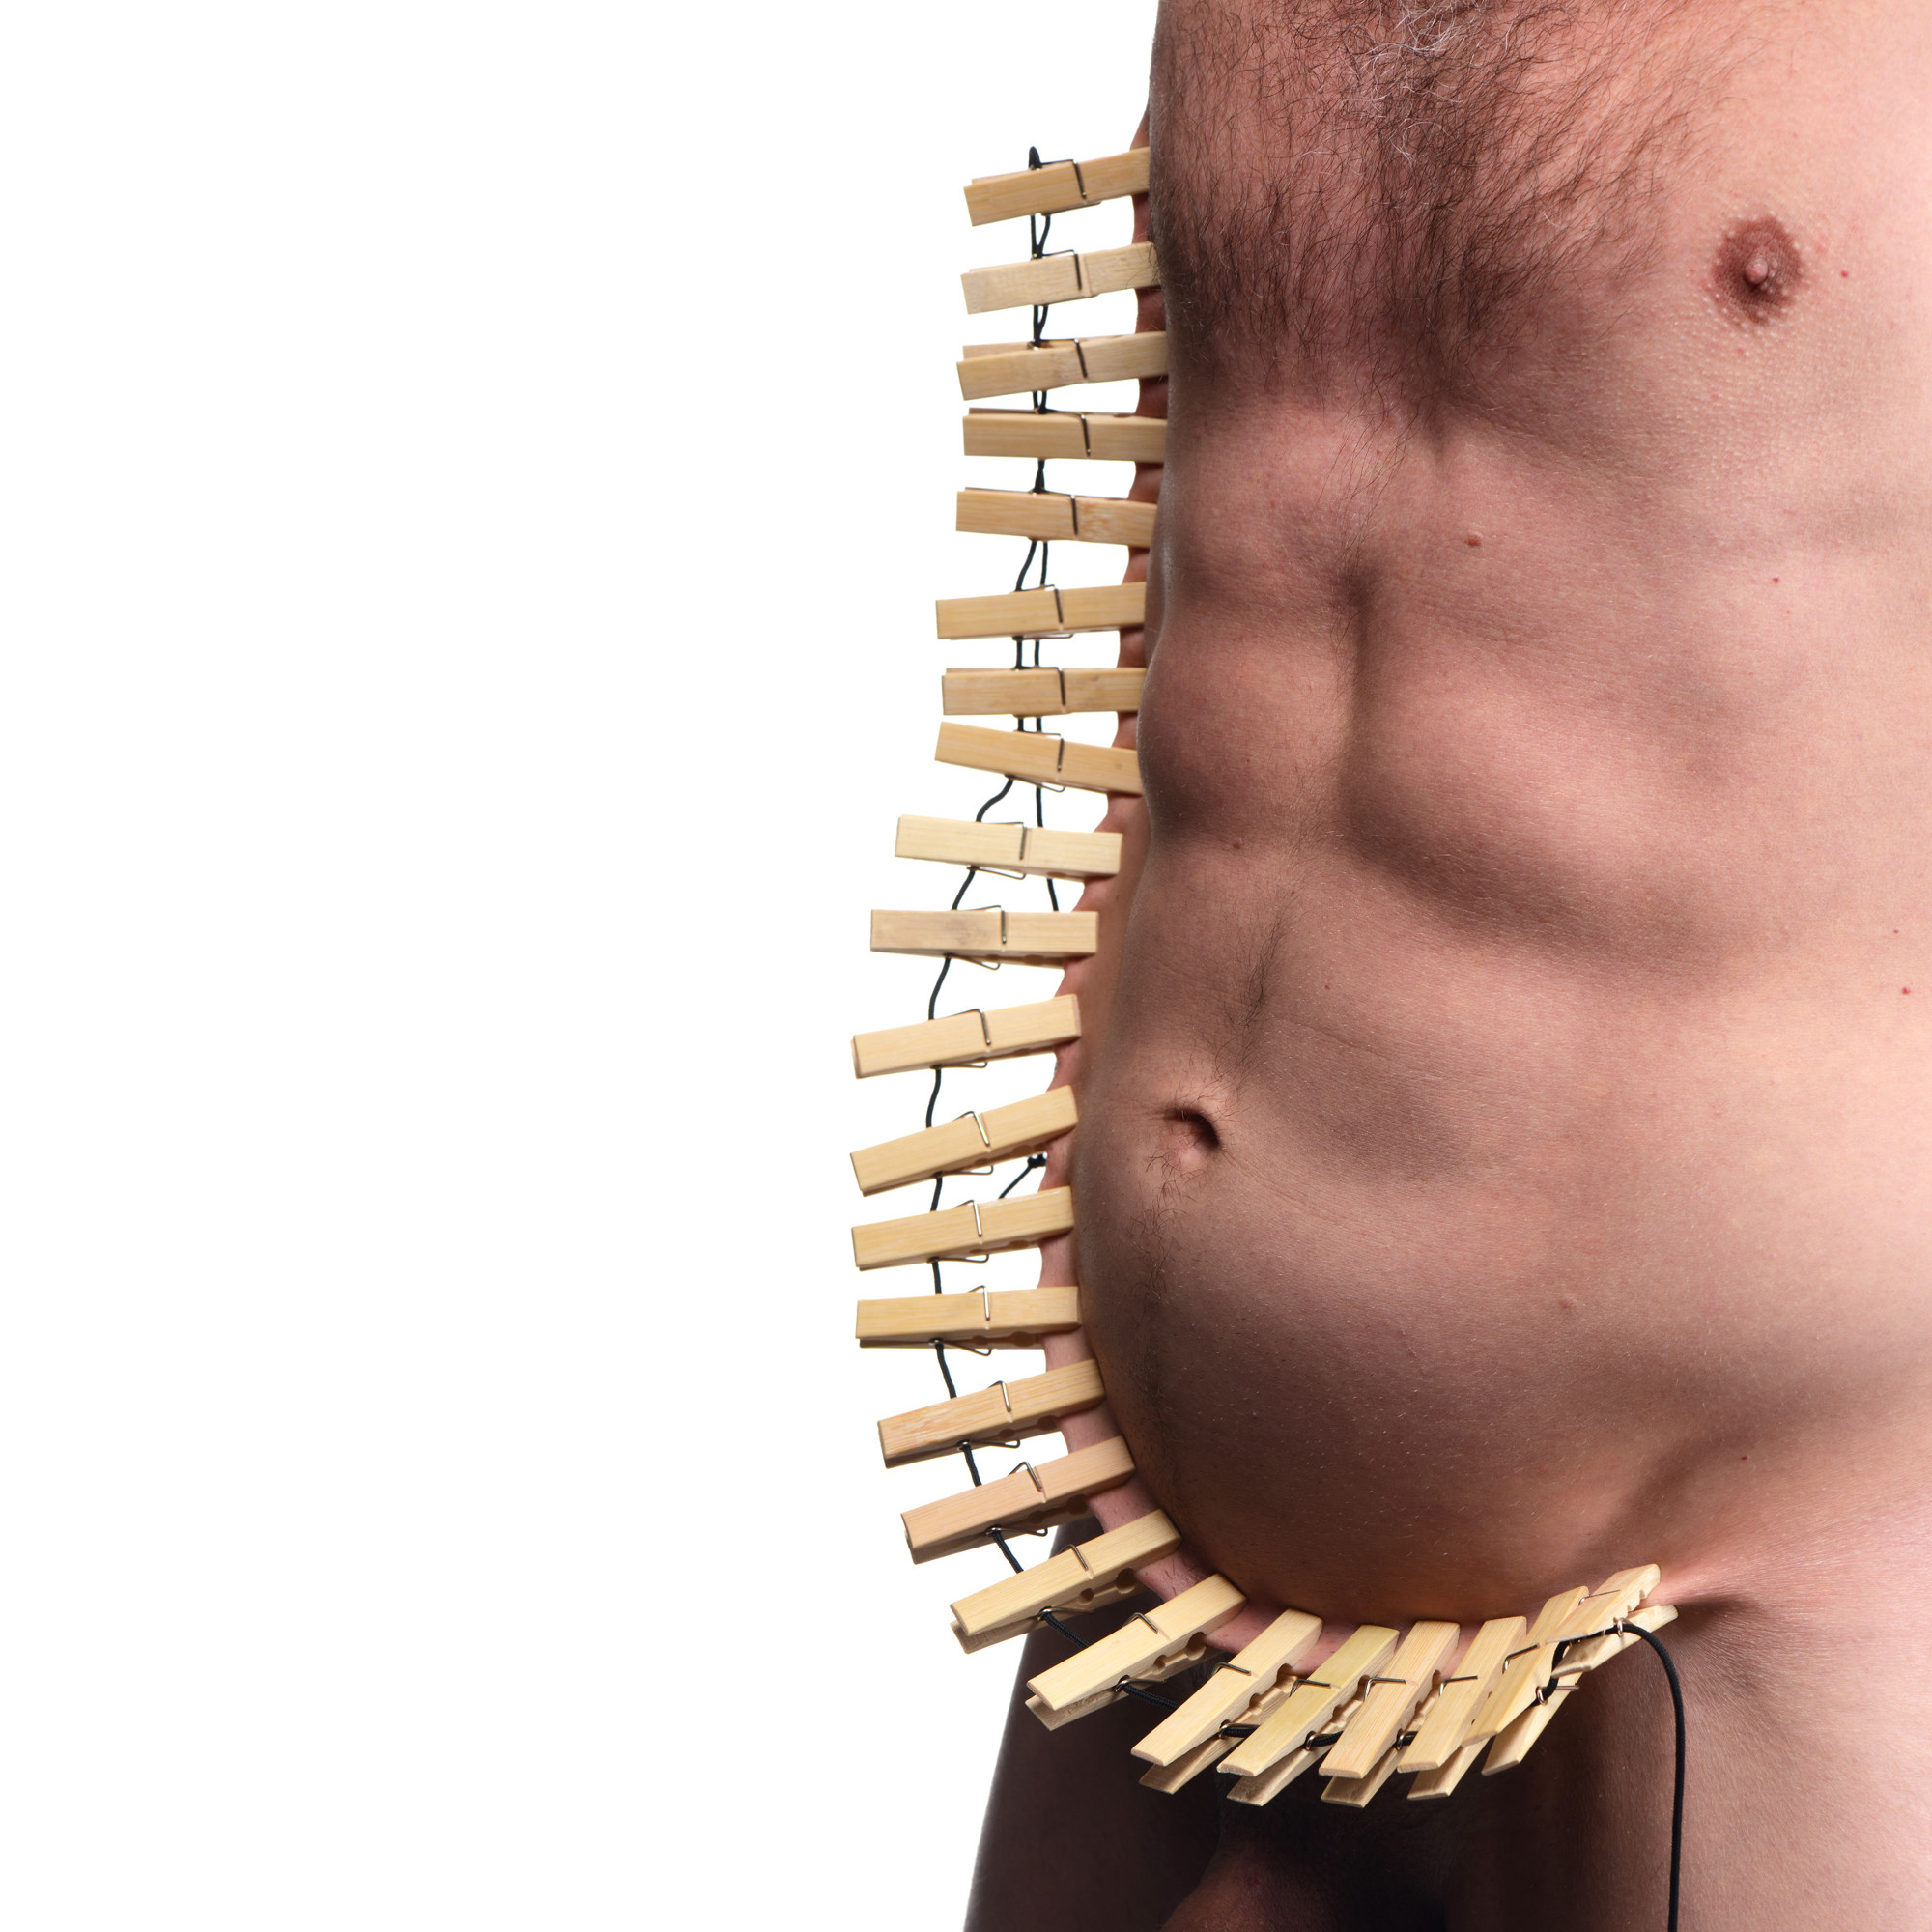 clothespins on nipples